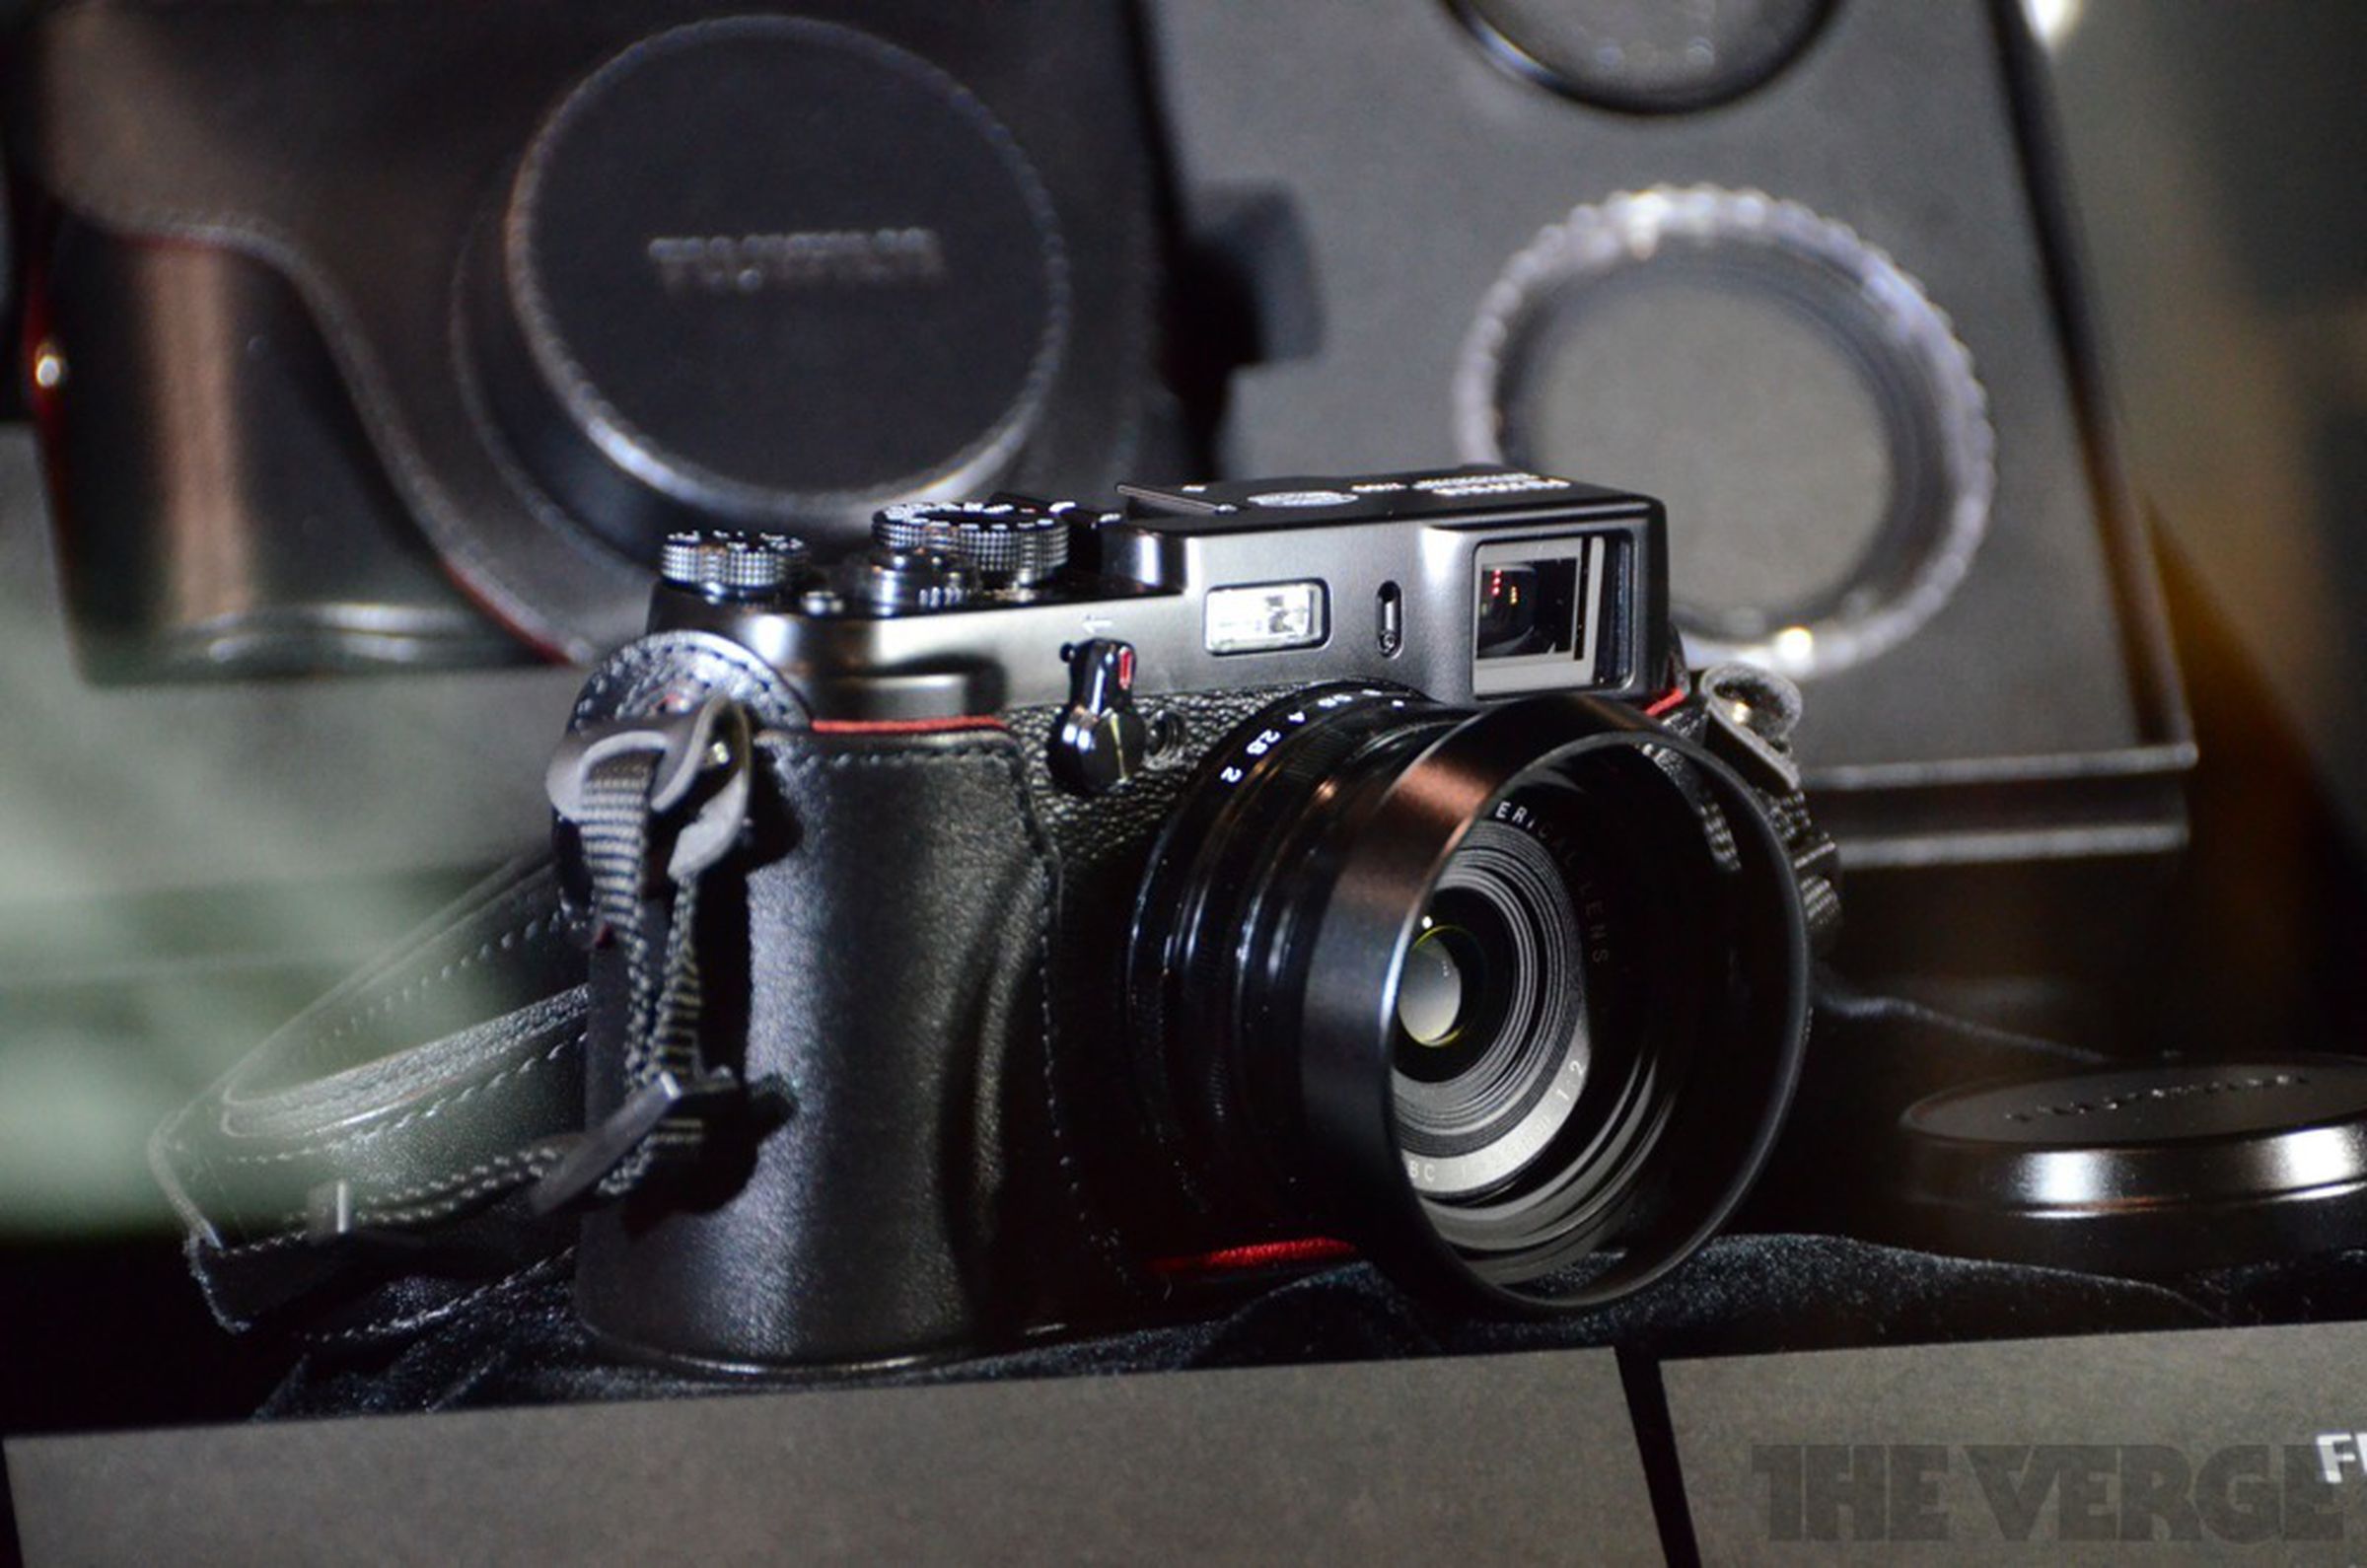 Fujifilm black X100 hands-on pictures